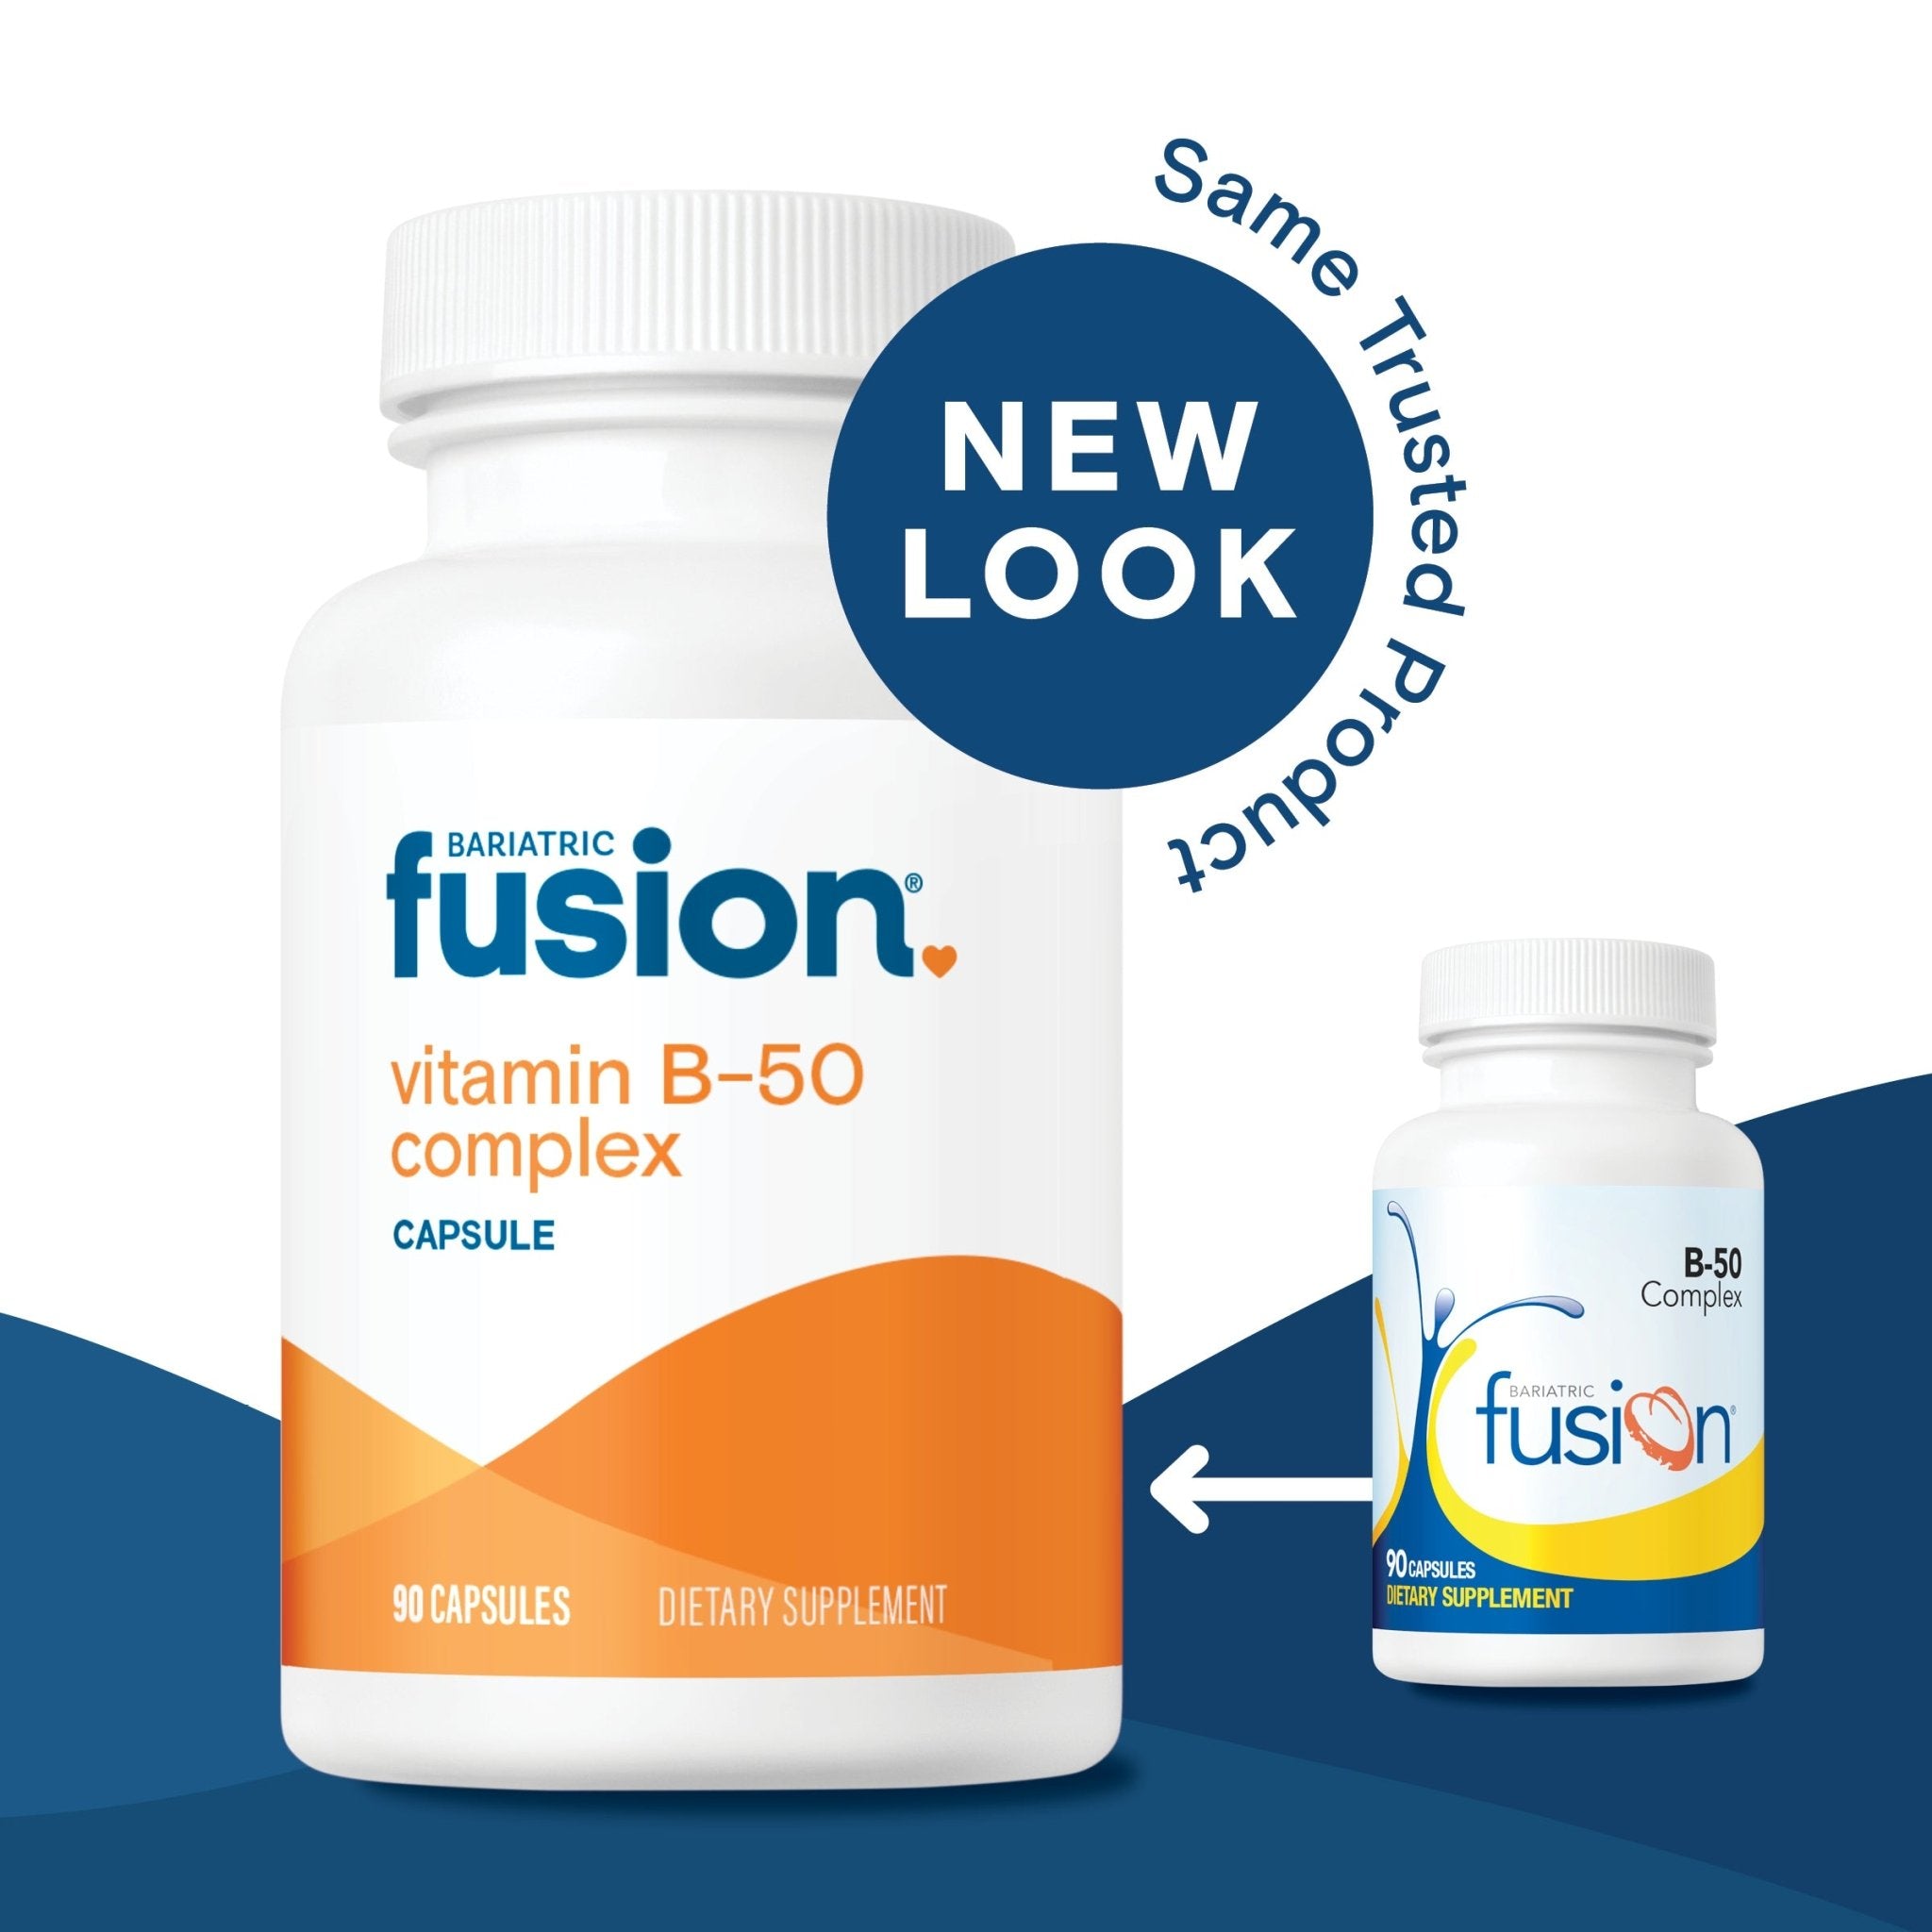 Bariatric Fusion Vitamin B-50 Complex new look, same trusted product.